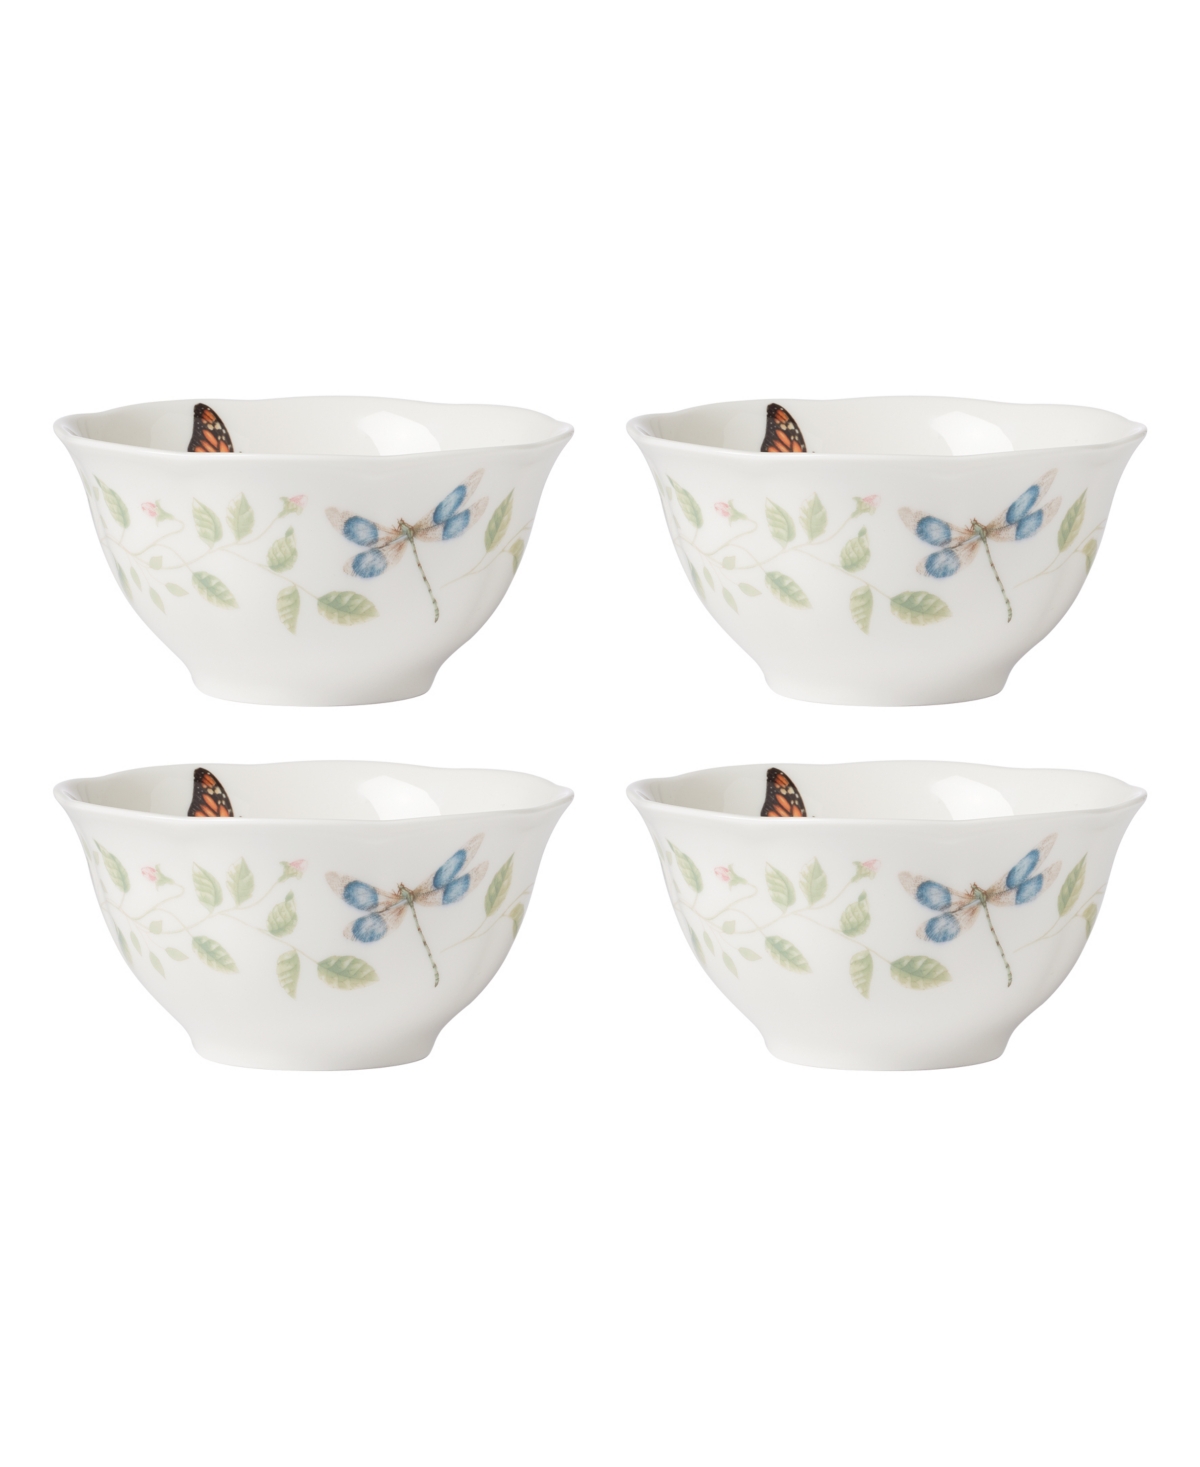 Butterfly Meadow Floral 4 Piece Rice Bowl Set, Service for 4 - Multi, White